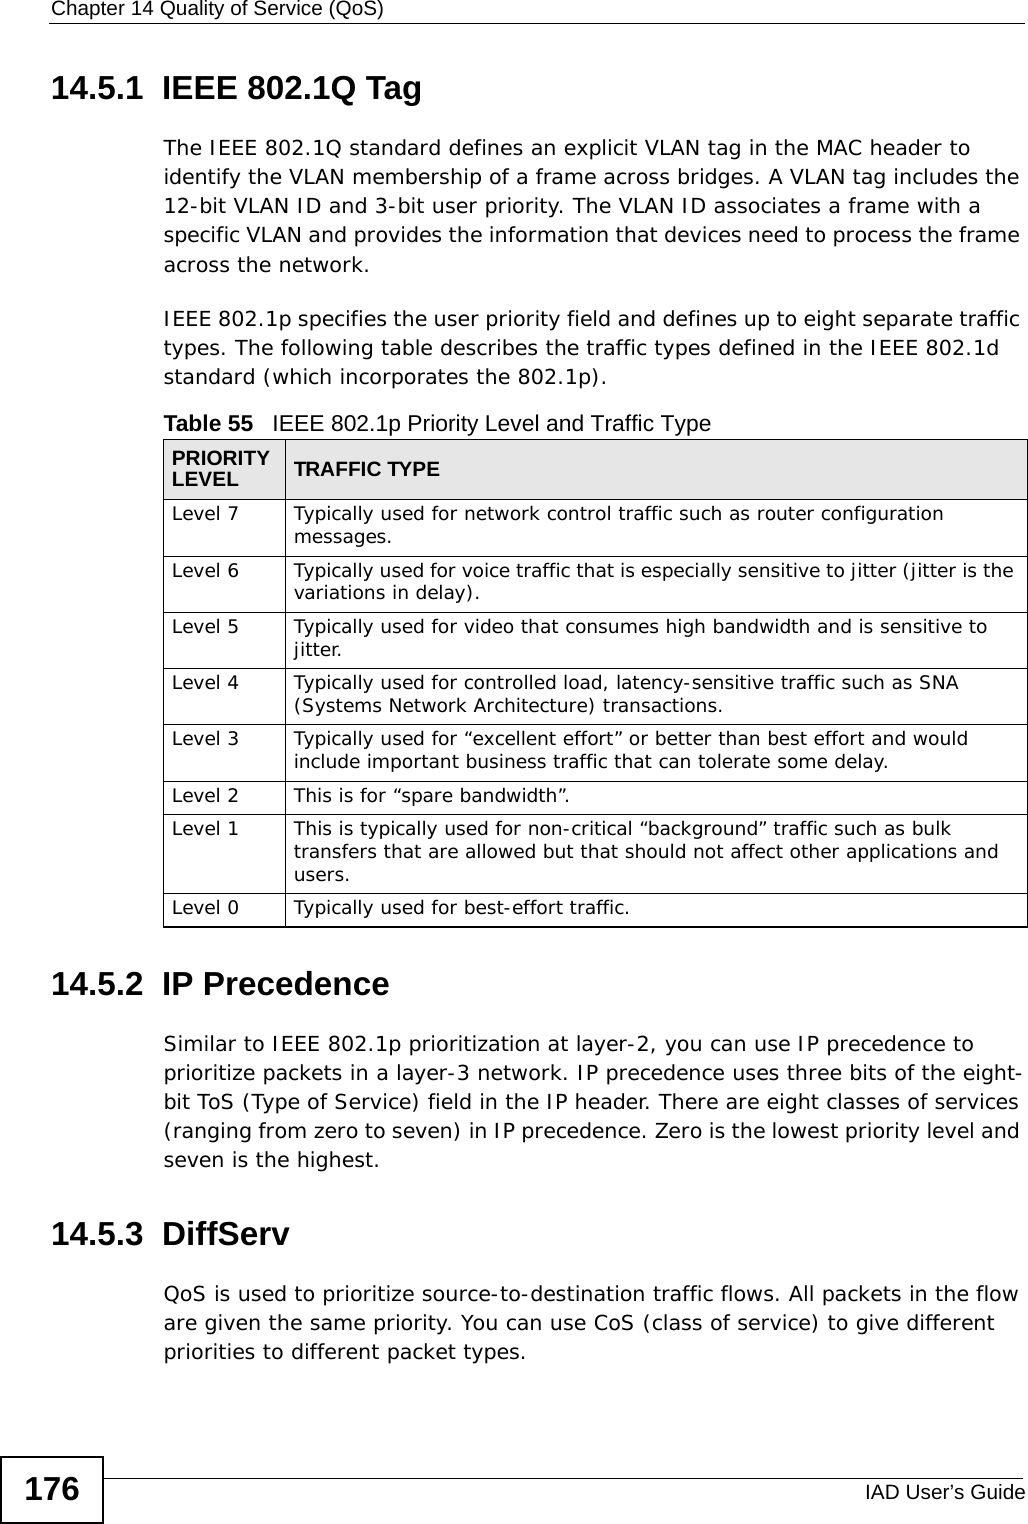 Chapter 14 Quality of Service (QoS)IAD User’s Guide17614.5.1  IEEE 802.1Q TagThe IEEE 802.1Q standard defines an explicit VLAN tag in the MAC header to identify the VLAN membership of a frame across bridges. A VLAN tag includes the 12-bit VLAN ID and 3-bit user priority. The VLAN ID associates a frame with a specific VLAN and provides the information that devices need to process the frame across the network. IEEE 802.1p specifies the user priority field and defines up to eight separate traffic types. The following table describes the traffic types defined in the IEEE 802.1d standard (which incorporates the 802.1p).  14.5.2  IP PrecedenceSimilar to IEEE 802.1p prioritization at layer-2, you can use IP precedence to prioritize packets in a layer-3 network. IP precedence uses three bits of the eight-bit ToS (Type of Service) field in the IP header. There are eight classes of services (ranging from zero to seven) in IP precedence. Zero is the lowest priority level and seven is the highest. 14.5.3  DiffServ QoS is used to prioritize source-to-destination traffic flows. All packets in the flow are given the same priority. You can use CoS (class of service) to give different priorities to different packet types.Table 55   IEEE 802.1p Priority Level and Traffic TypePRIORITY  LEVEL TRAFFIC TYPELevel 7 Typically used for network control traffic such as router configuration messages.Level 6 Typically used for voice traffic that is especially sensitive to jitter (jitter is the variations in delay).Level 5 Typically used for video that consumes high bandwidth and is sensitive to jitter.Level 4 Typically used for controlled load, latency-sensitive traffic such as SNA (Systems Network Architecture) transactions.Level 3 Typically used for “excellent effort” or better than best effort and would include important business traffic that can tolerate some delay.Level 2 This is for “spare bandwidth”. Level 1 This is typically used for non-critical “background” traffic such as bulk transfers that are allowed but that should not affect other applications and users. Level 0 Typically used for best-effort traffic.